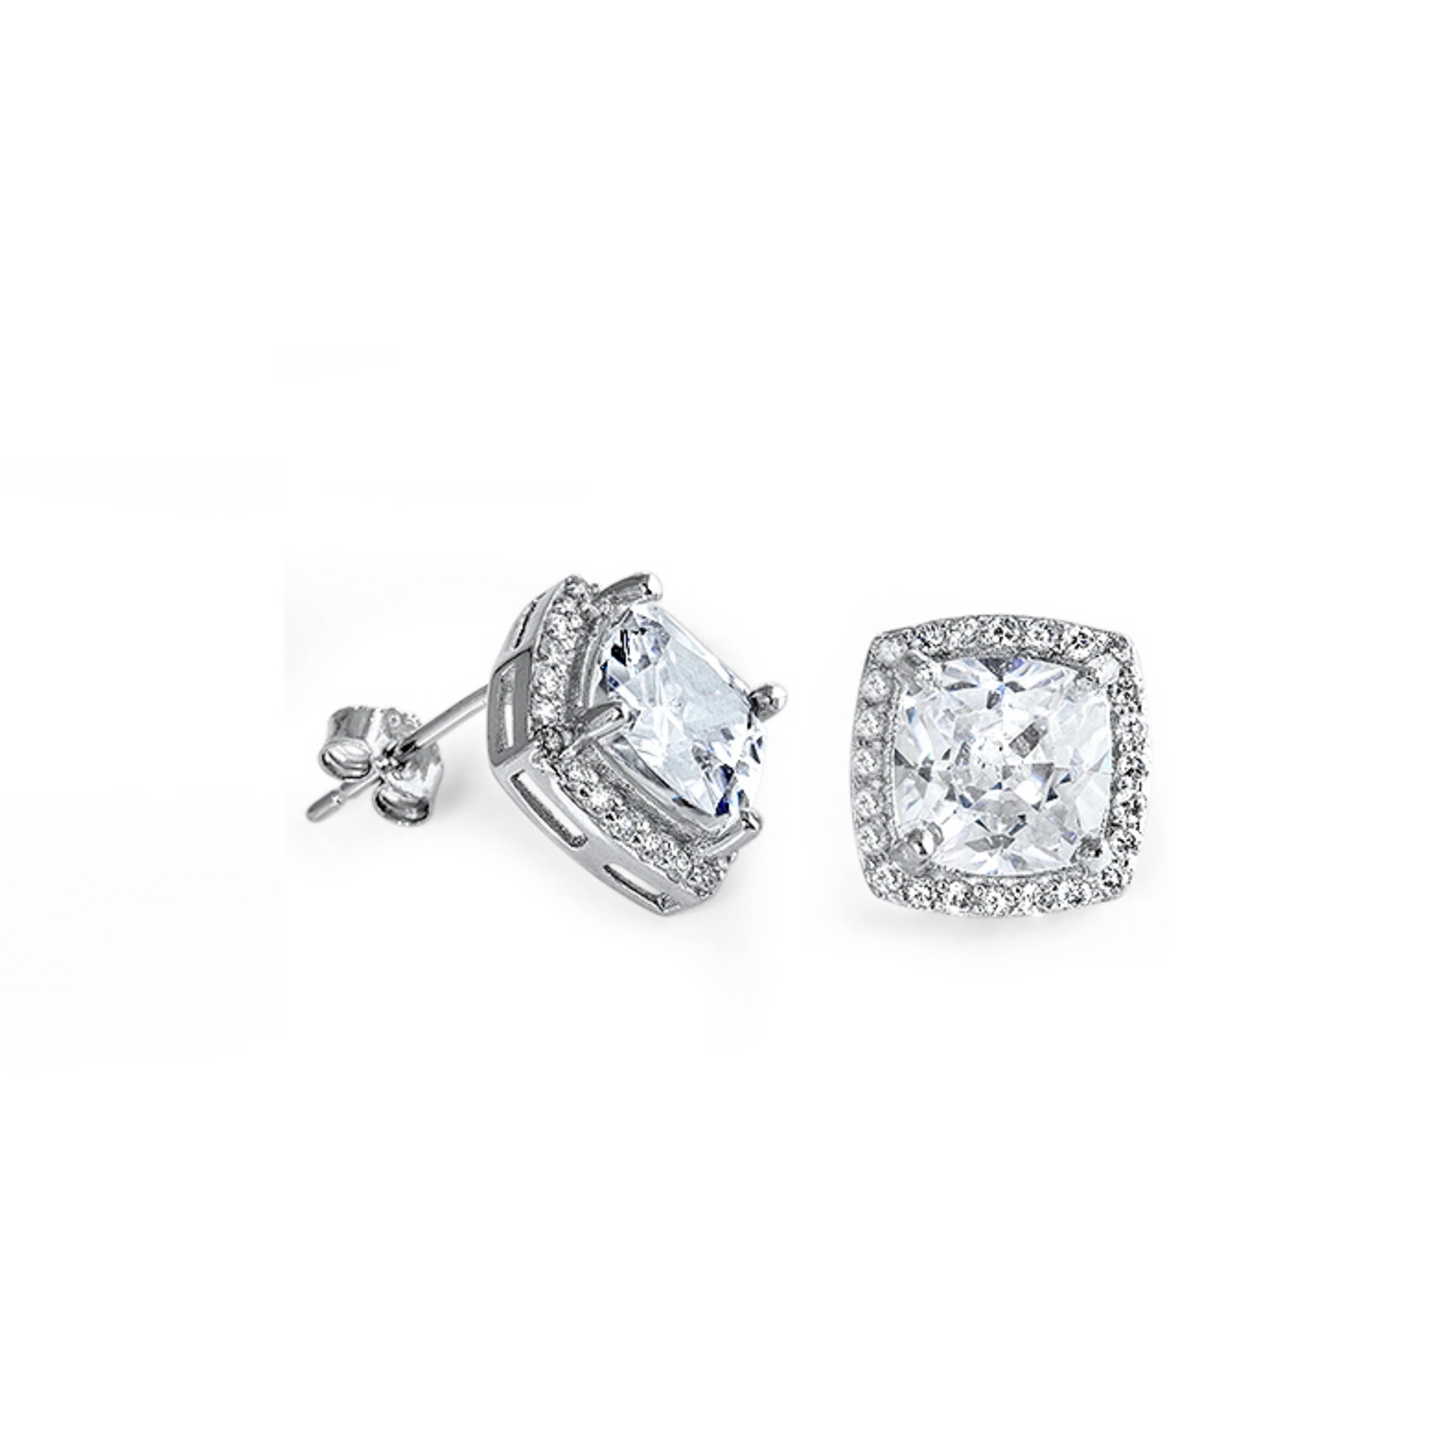 Sterling Silver Square Cubic Zirconia Halo Stud Earrings